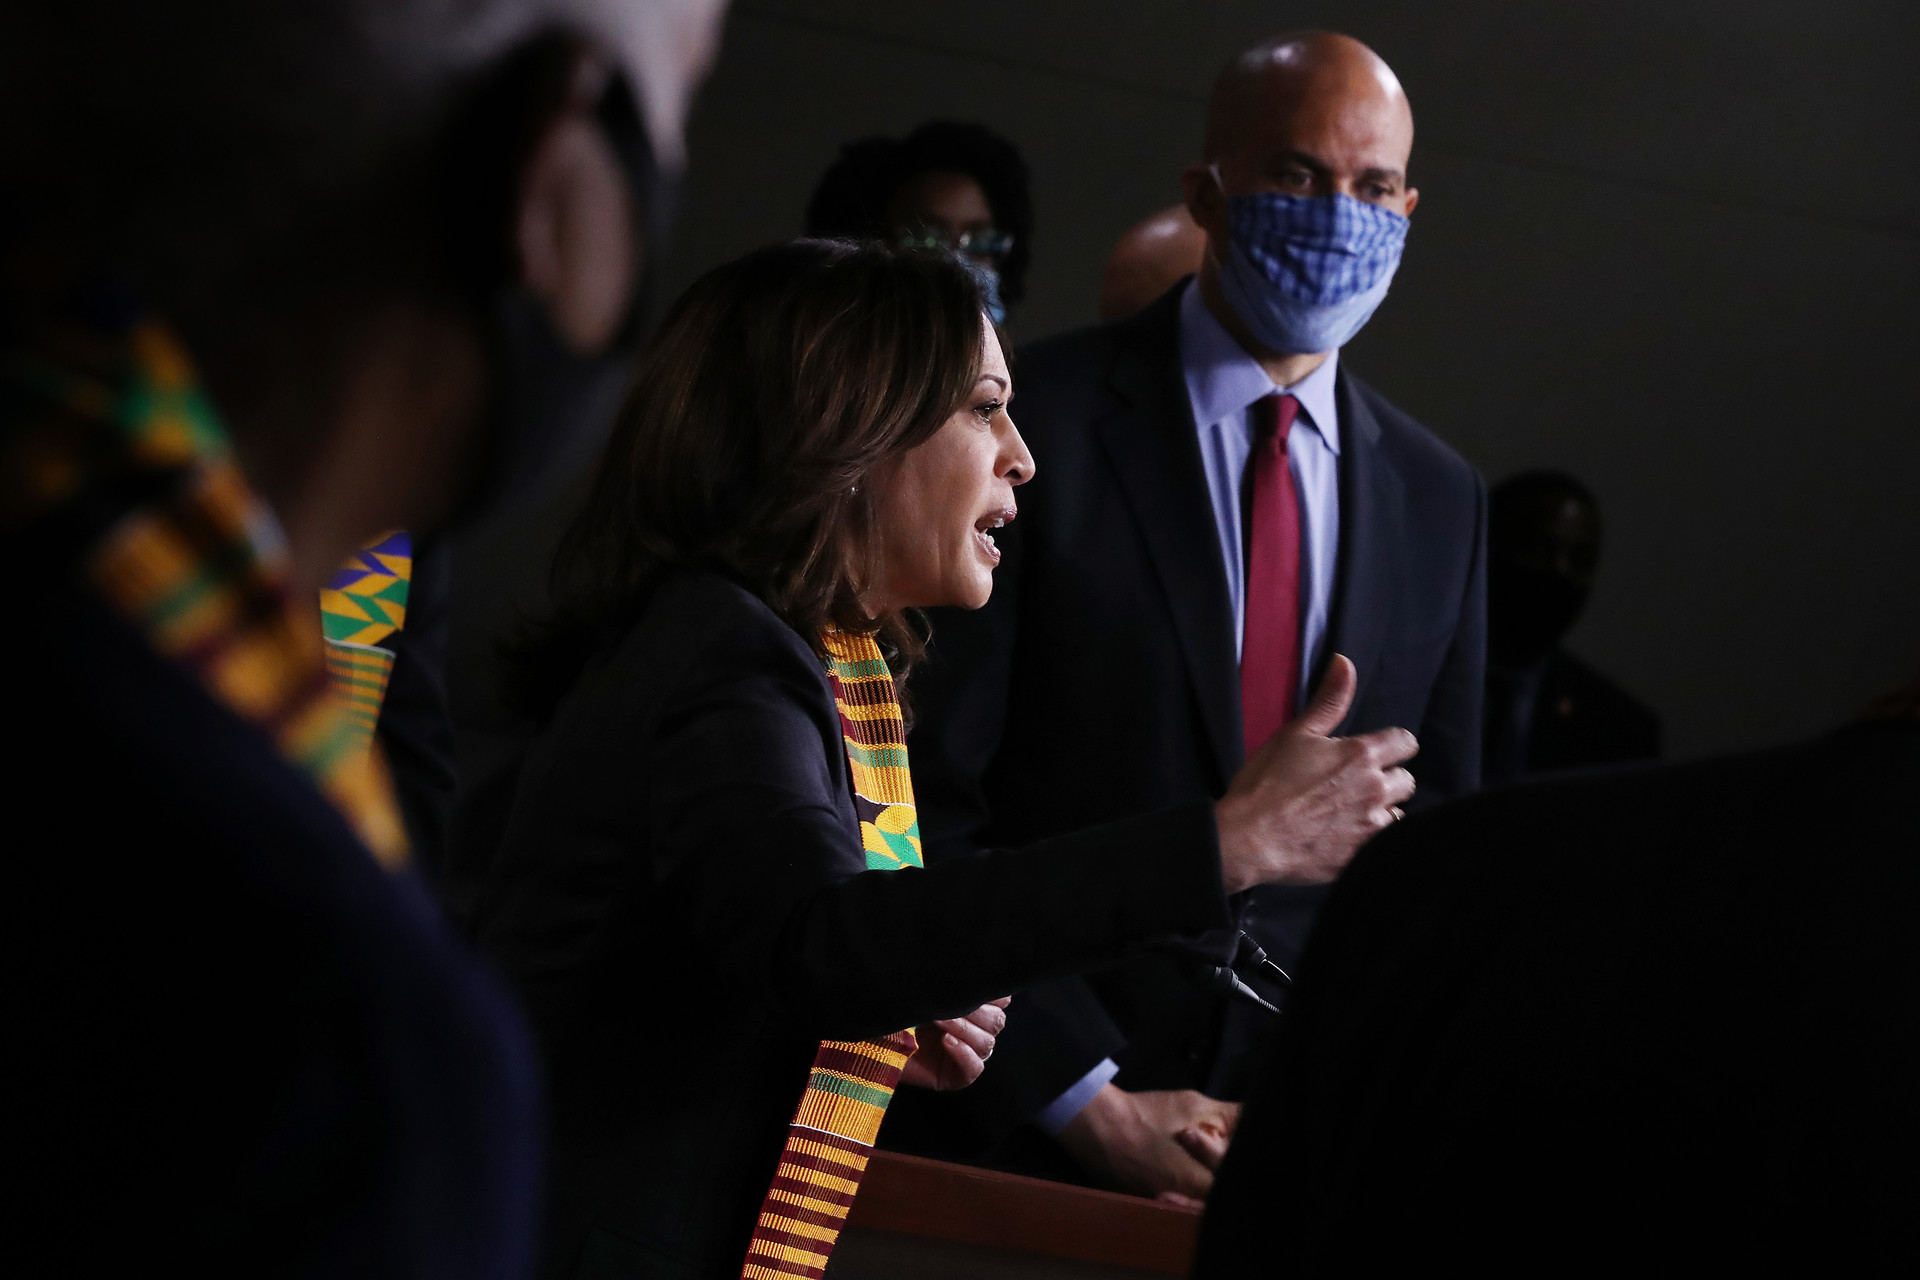 Sen. Kamala Harris (D-CA) (L) and Sen. Cory Booker (D-NJ) join fellow Democrats from the House and Senate to introduce new legislation to end excessive use of force by police and make it easier to identify, track, and prosecute police misconduct at the U.S. Capitol June 08, 2020.